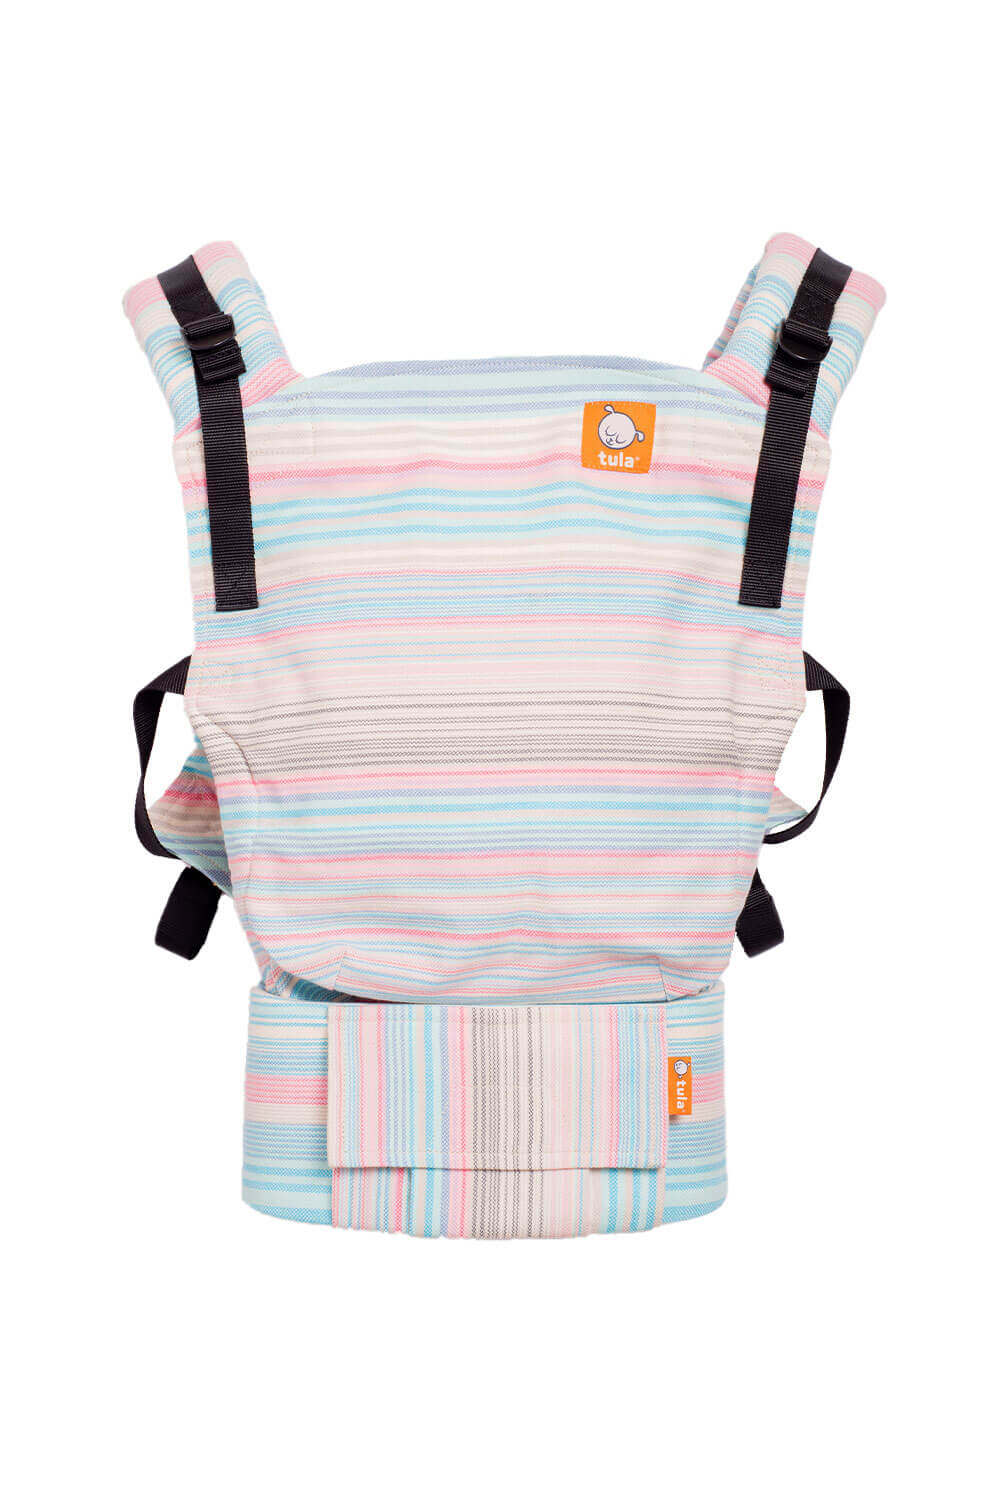 Peppa - Signature Handwoven Free-to-Grow Baby Carrier